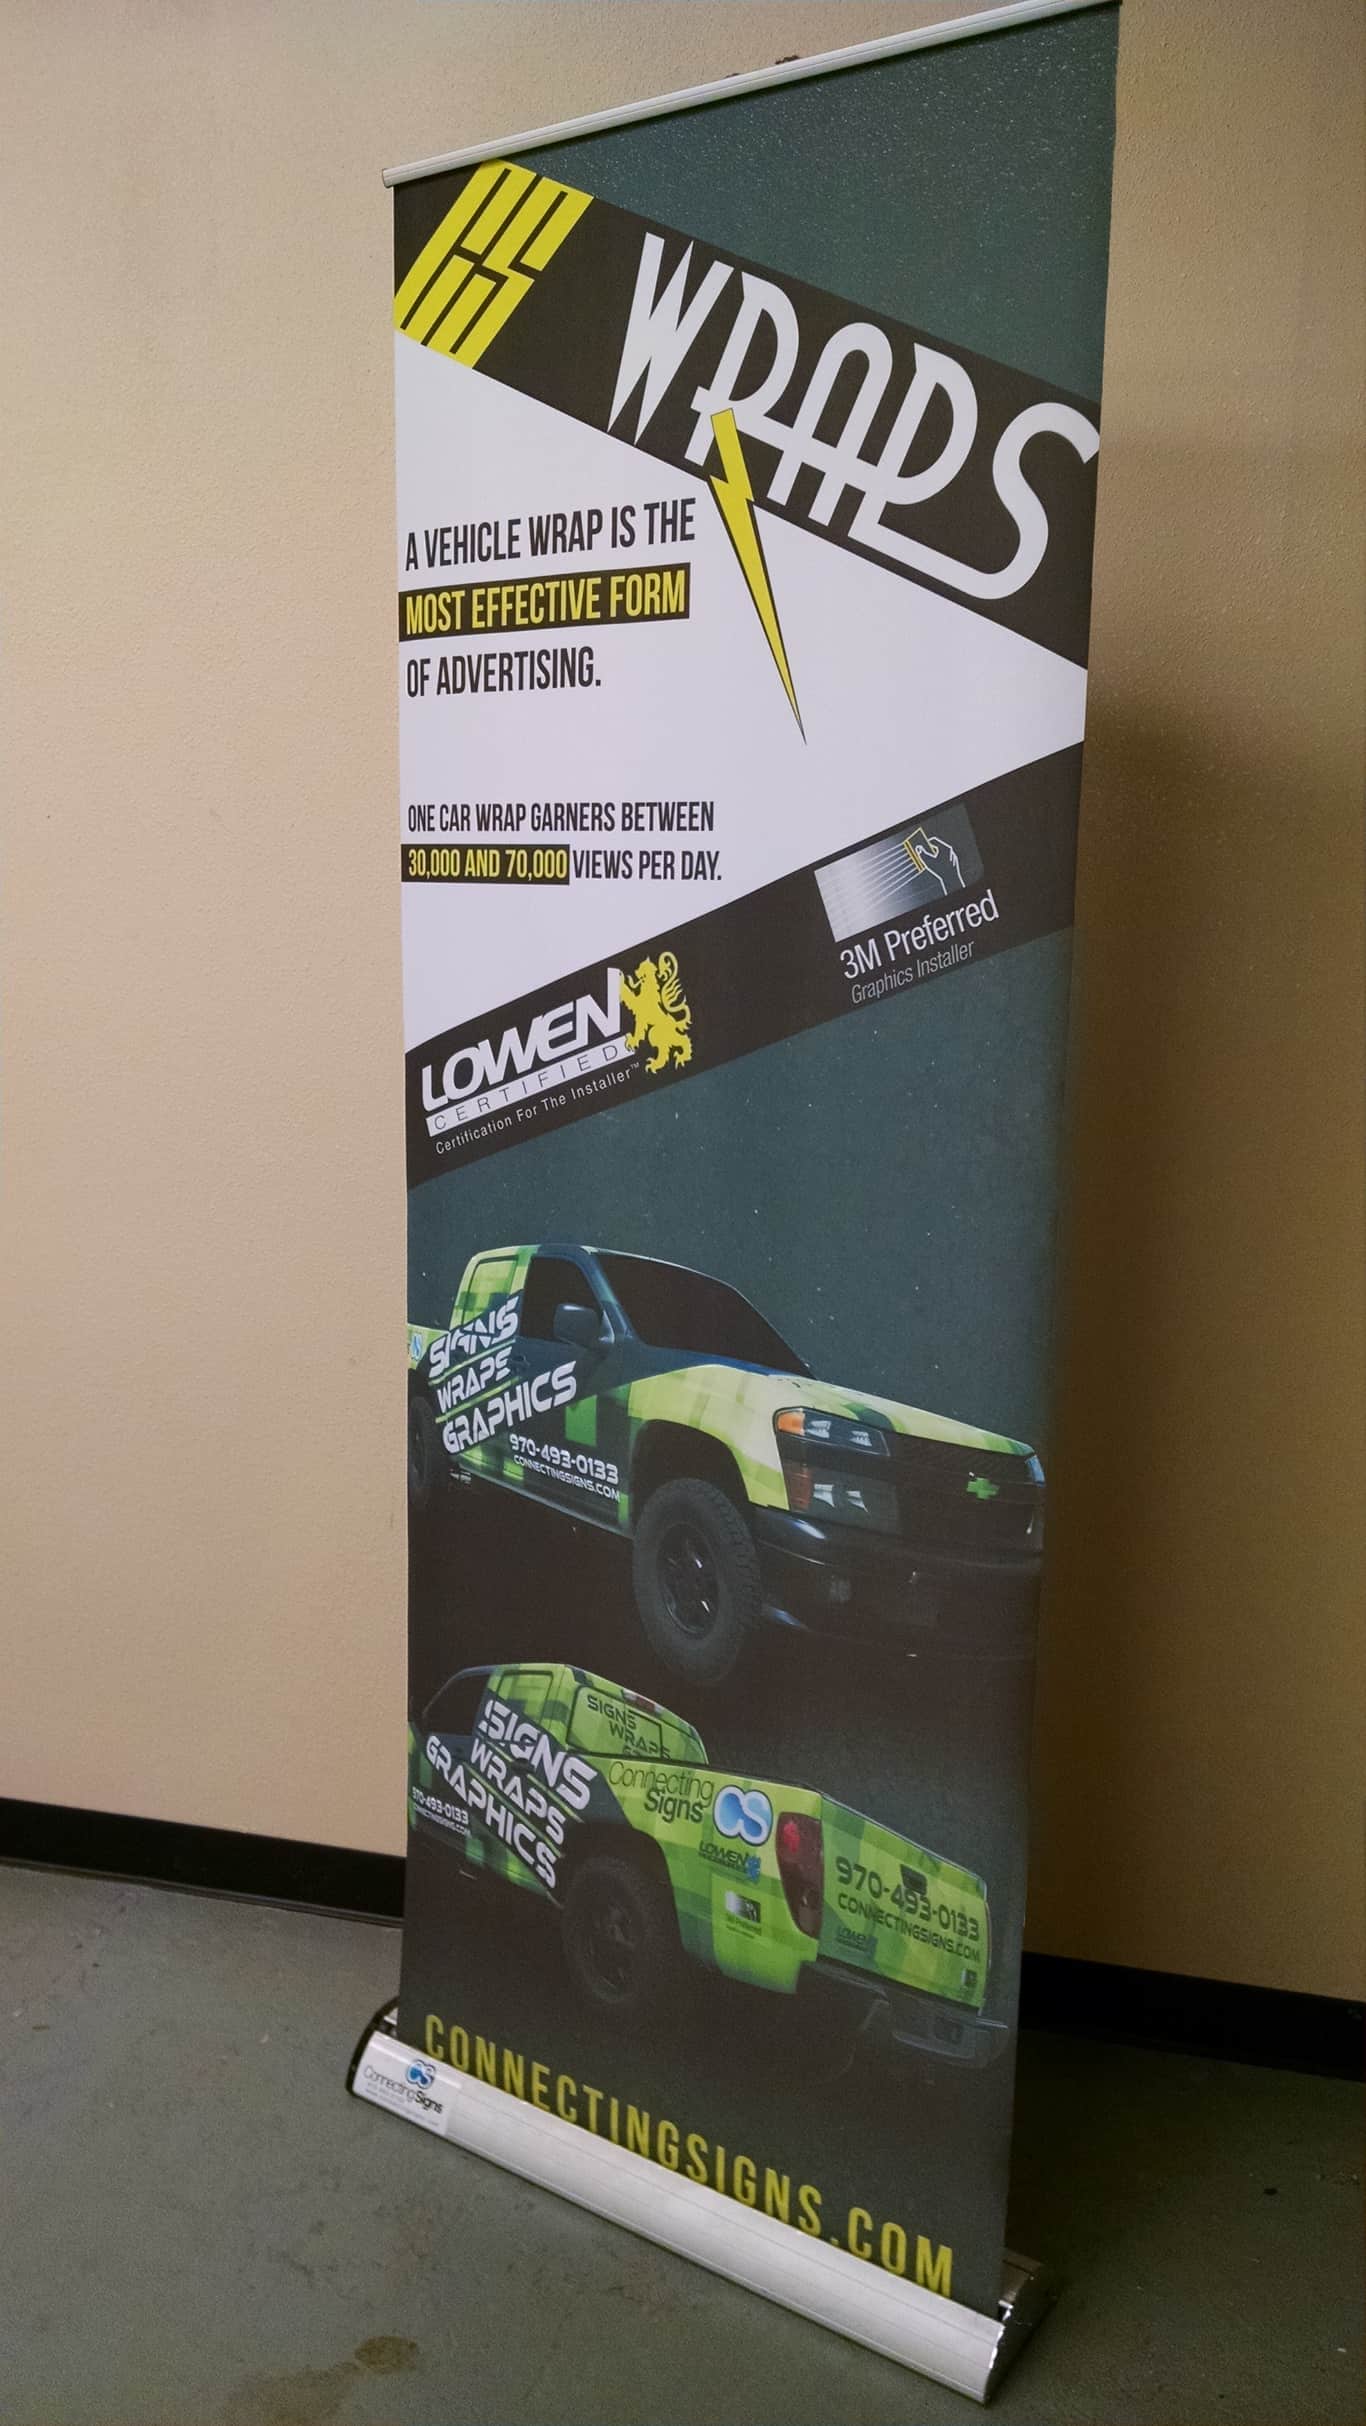 Fabric Retractable Banner - Signage Company - Connecting Signs